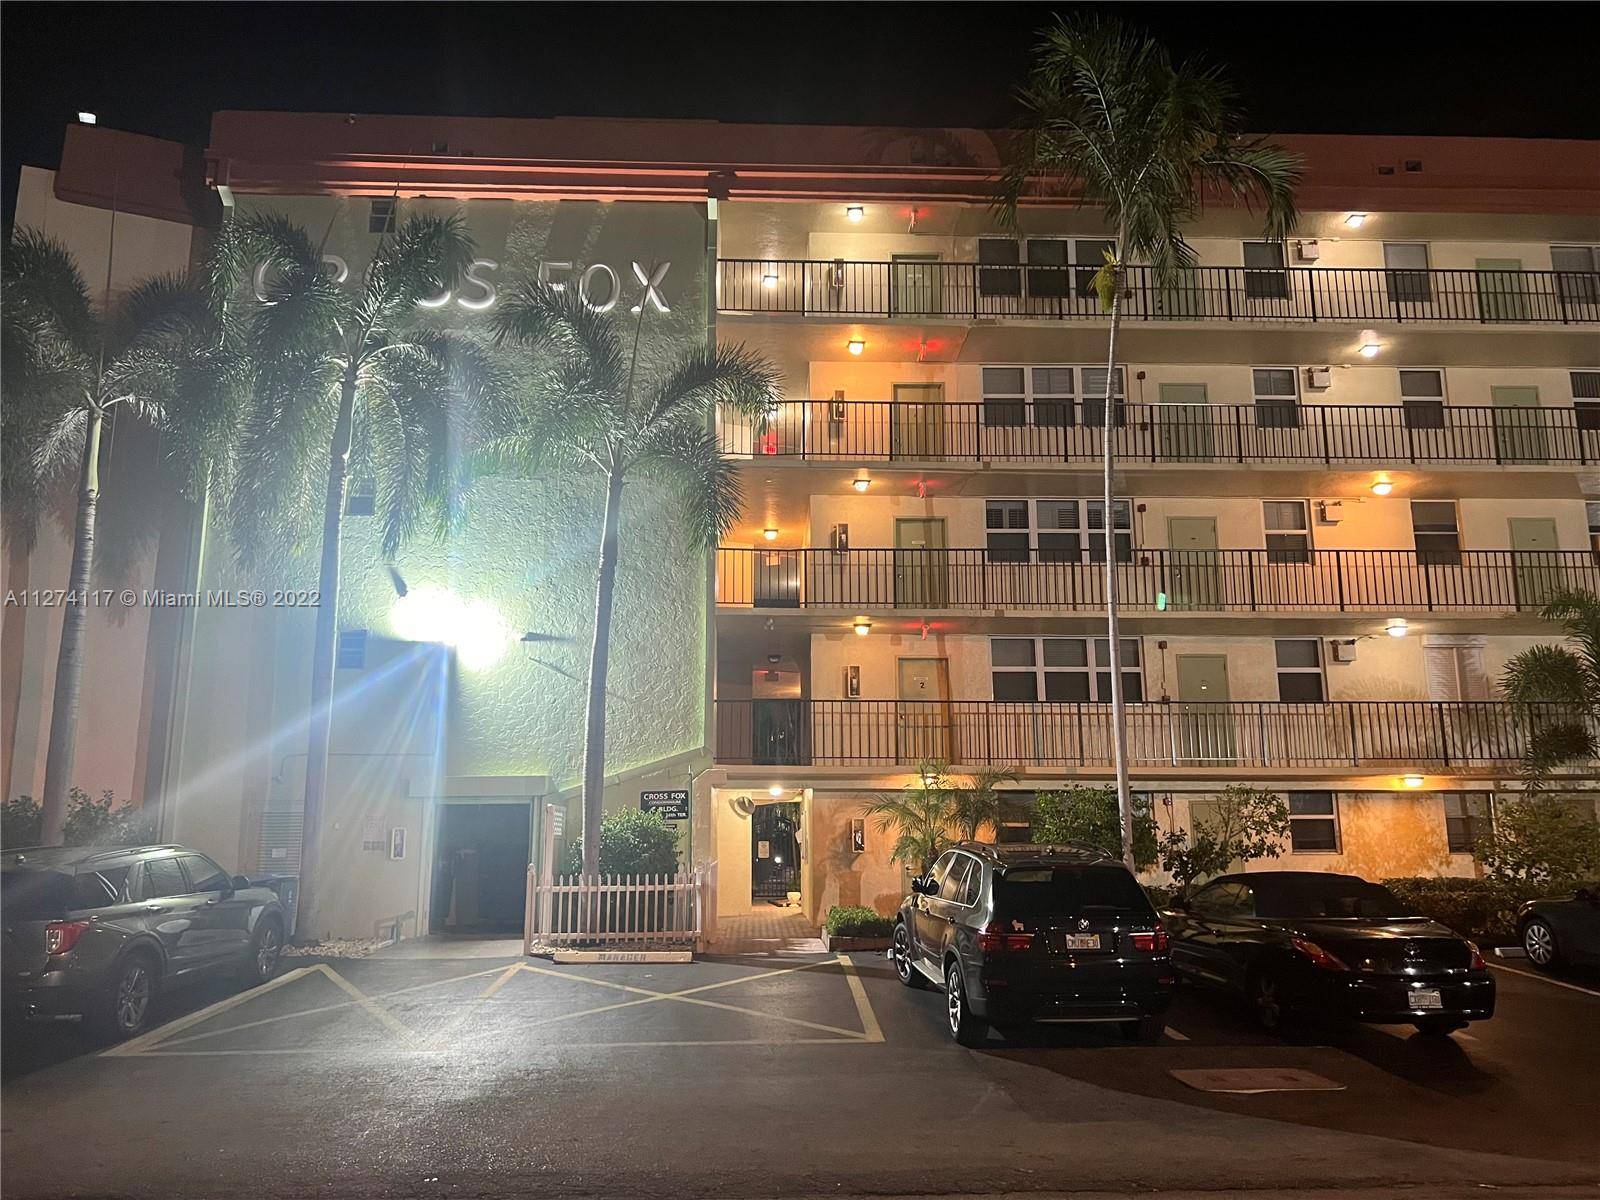 Enjoy owning in this unique condo East of US1 just a few blocks from Fort Lauderdale by the Sea with its amazing restaurants and wonderful beach.